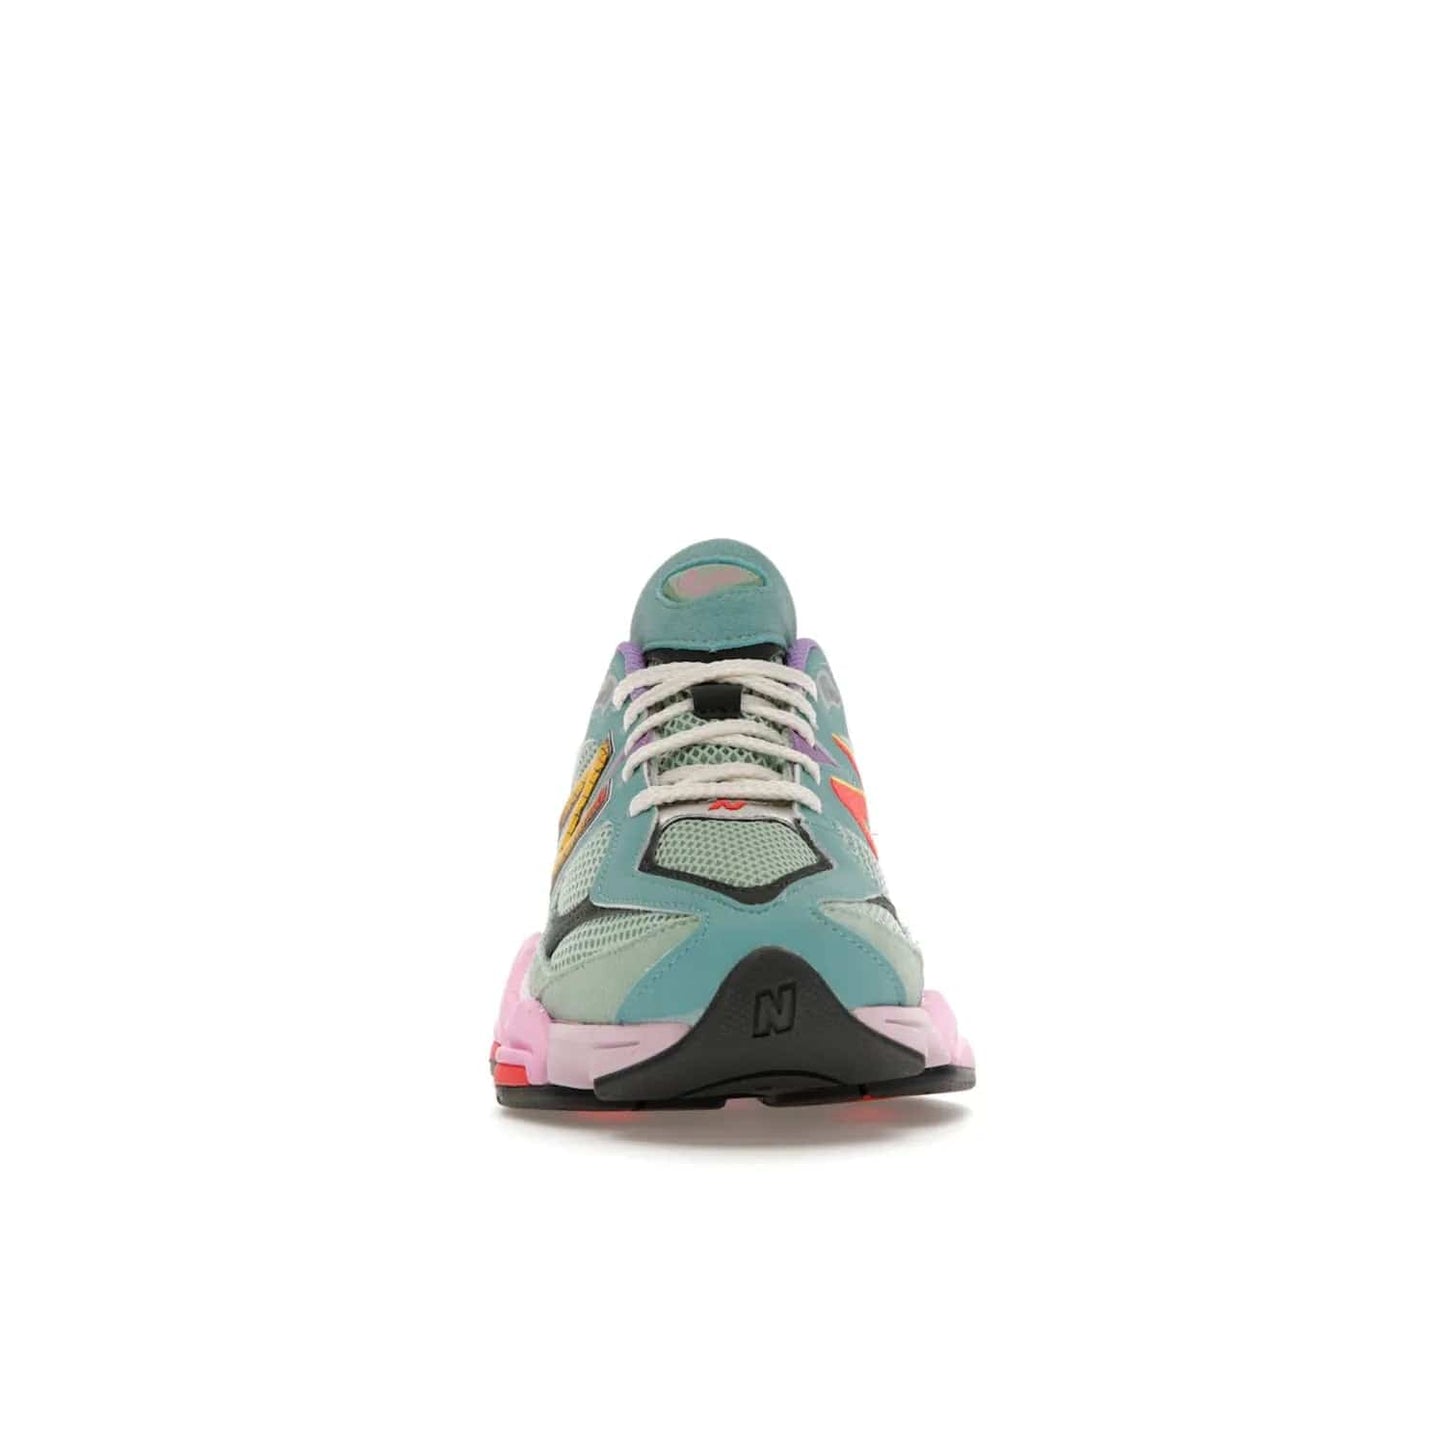 New Balance 9060 Warped Multi-Color - Image 10 - Only at www.BallersClubKickz.com - Enhance your style with the new New Balance 9060 Warped Multi-Colour! Suede overlays, mesh base layer and ABZORB midsole provide comfortable cushioning, while the colourful design ticks all the latest trends. Nylon laces offer an adjustable fit for maximum convenience. Debuting on March 31, 2023 - a must-have addition to your sneaker collection.